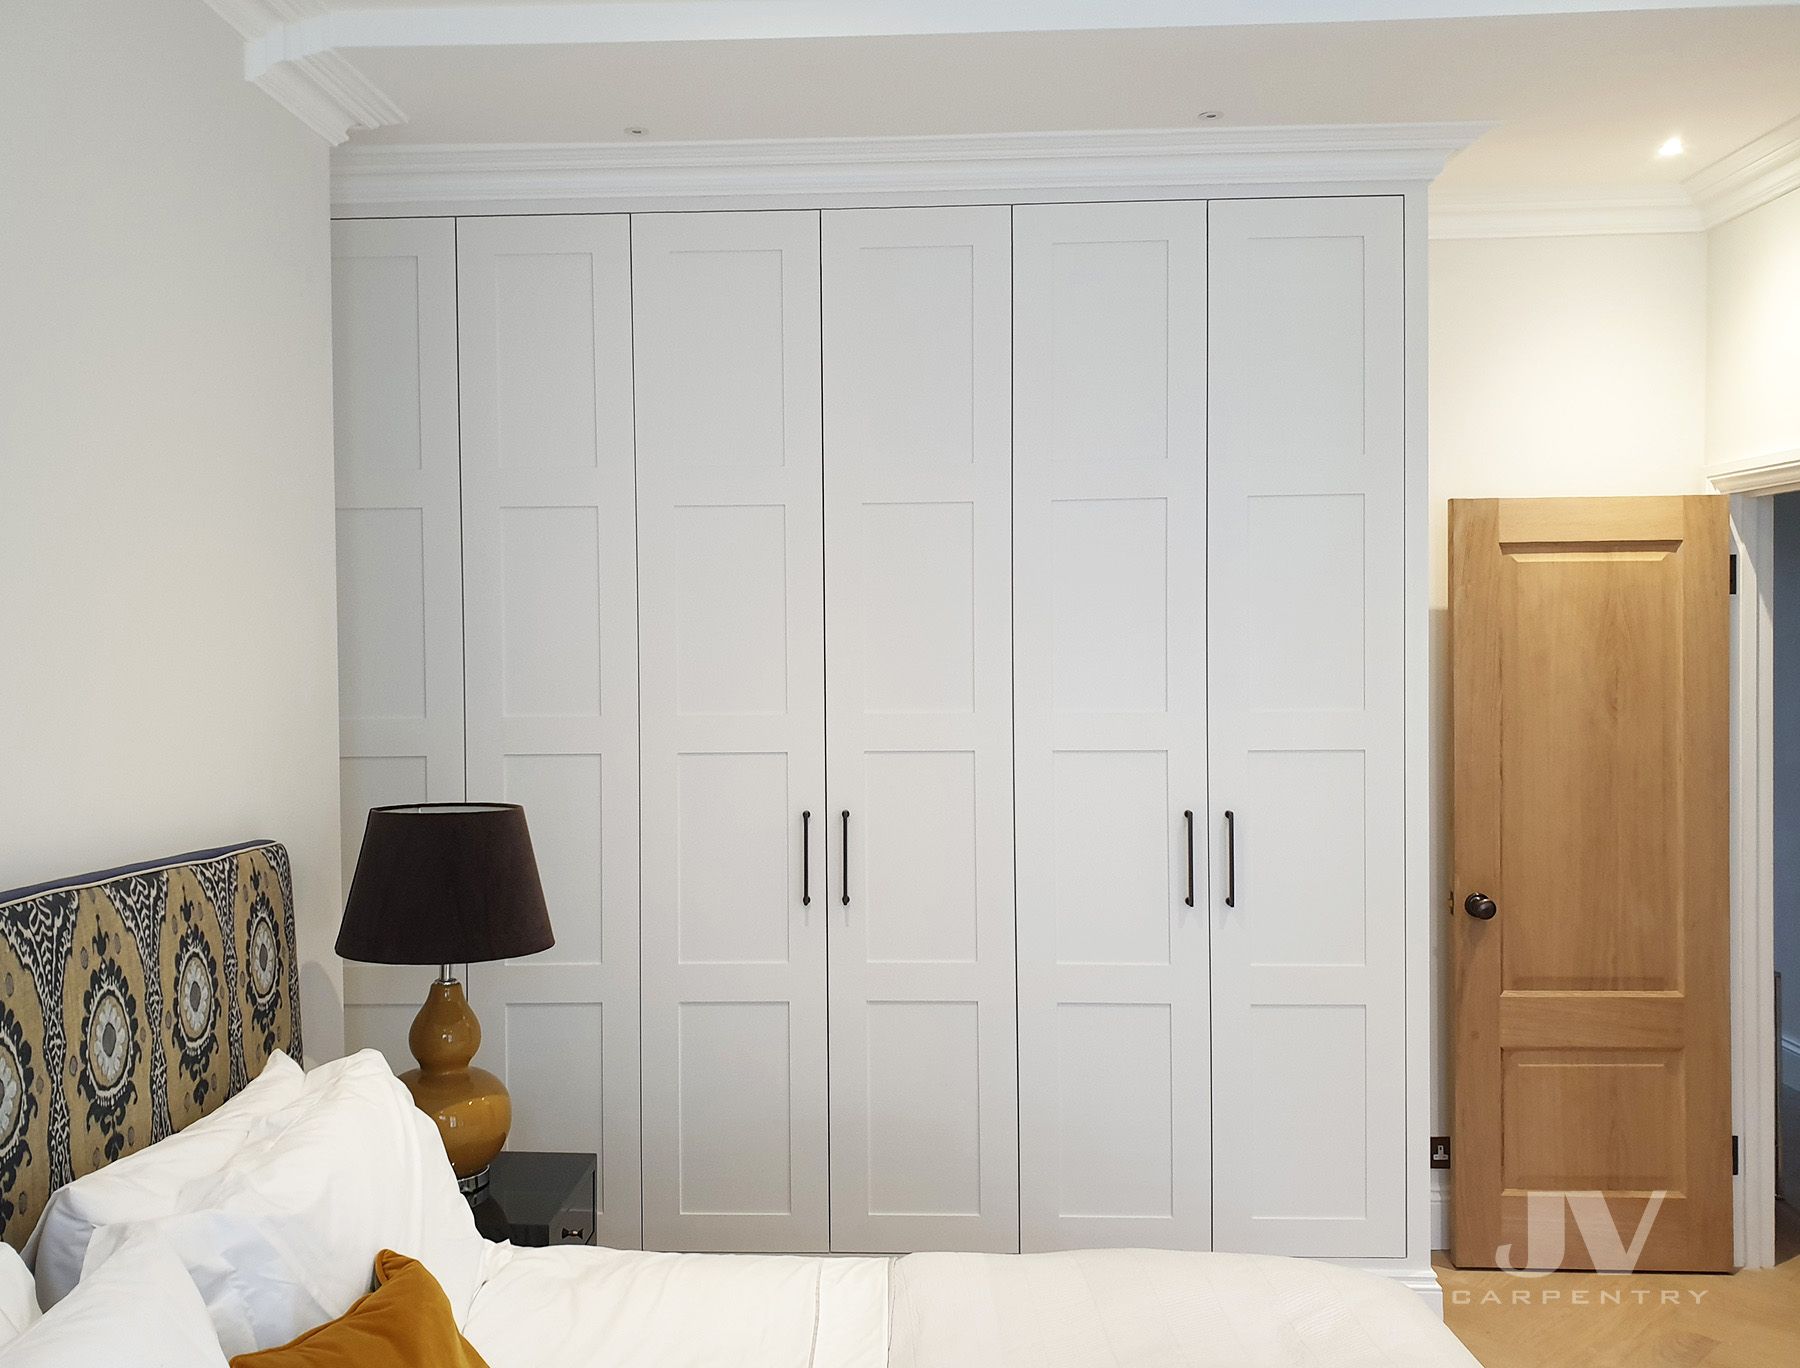 Fitted Wardrobes | Bespoke Bedroom Furniture | Jv Carpentry With Regard To Built In Wardrobes (View 11 of 15)